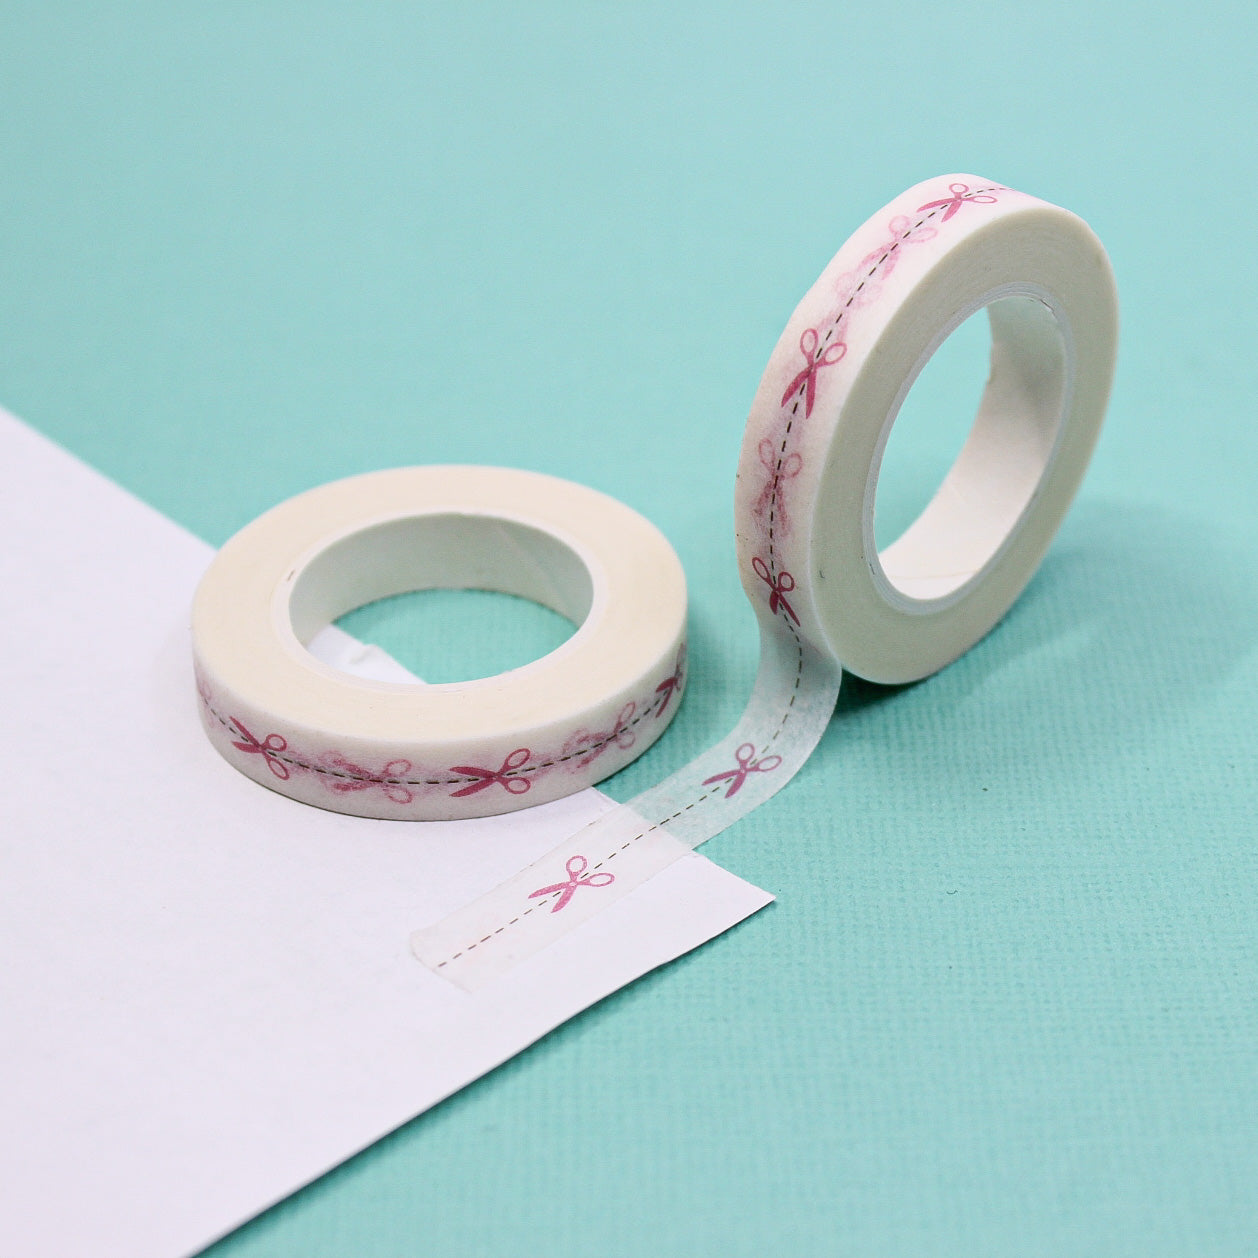 Perfect for adding a crafty flair to your scrapbooking, journaling, or card-making endeavors. This tape is sold at BBB Supplies Craft Shop.